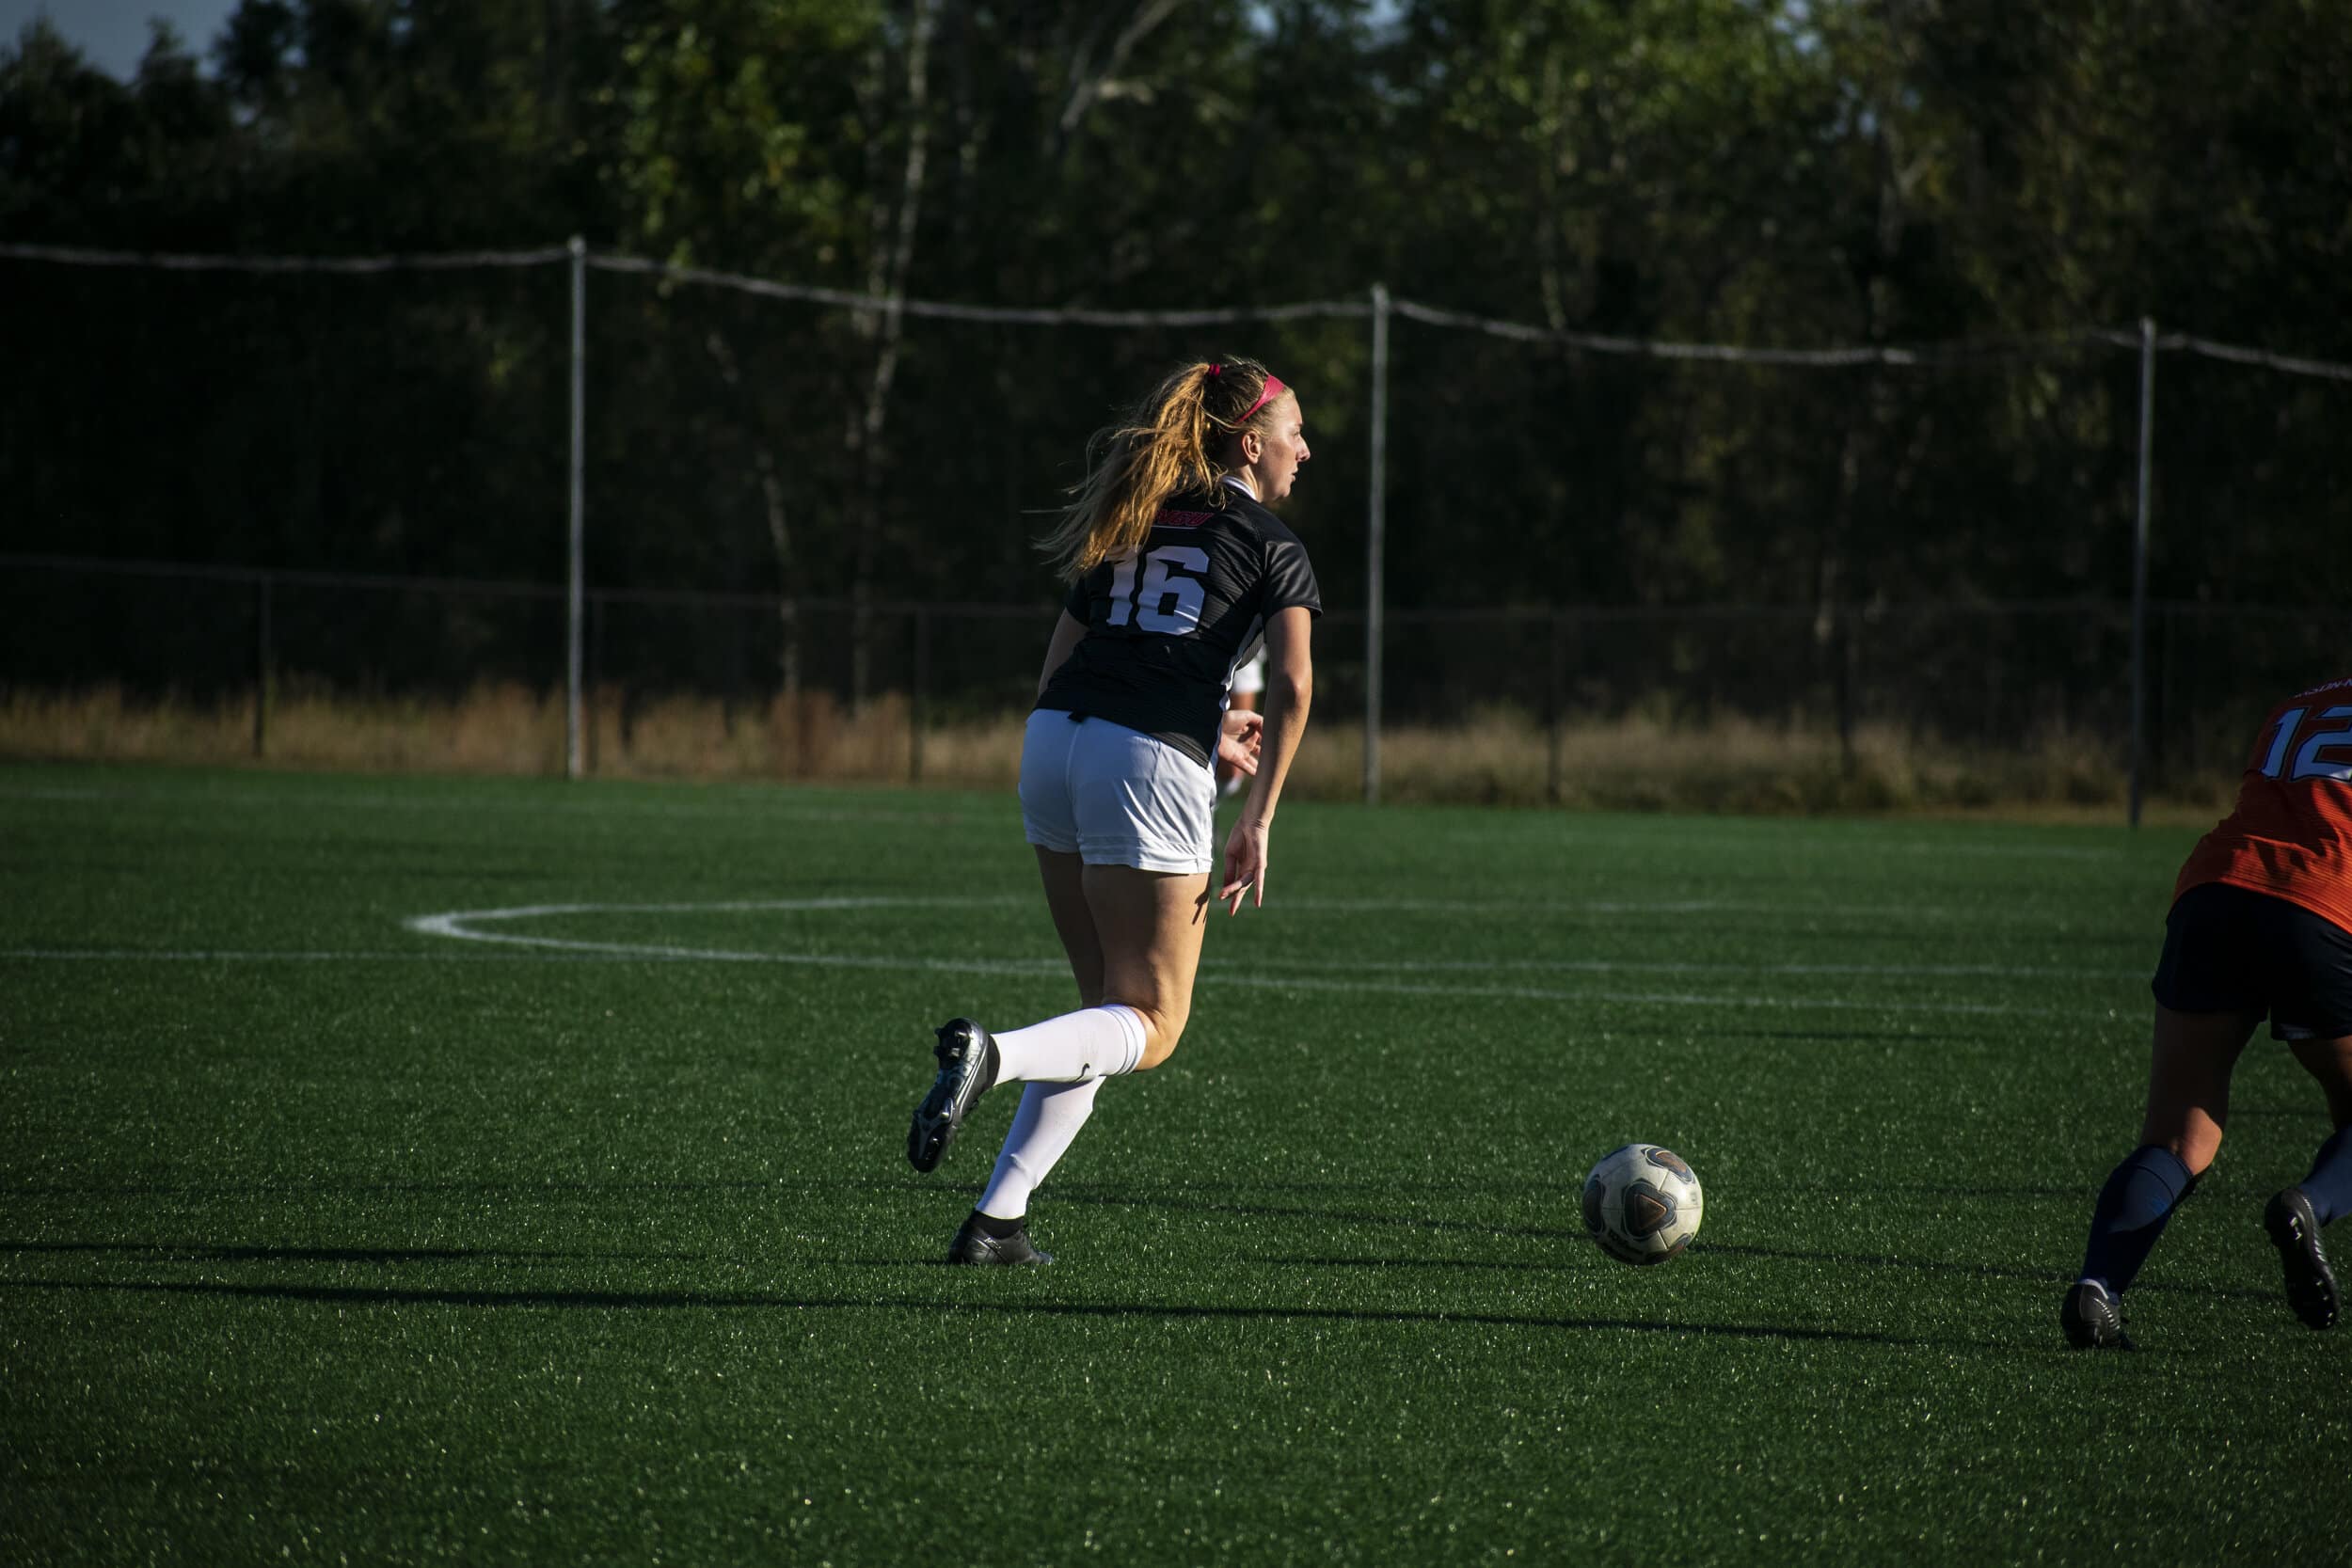 Sophomore Shelby Shepherd (16) aims to reach the Eagles side of the field.